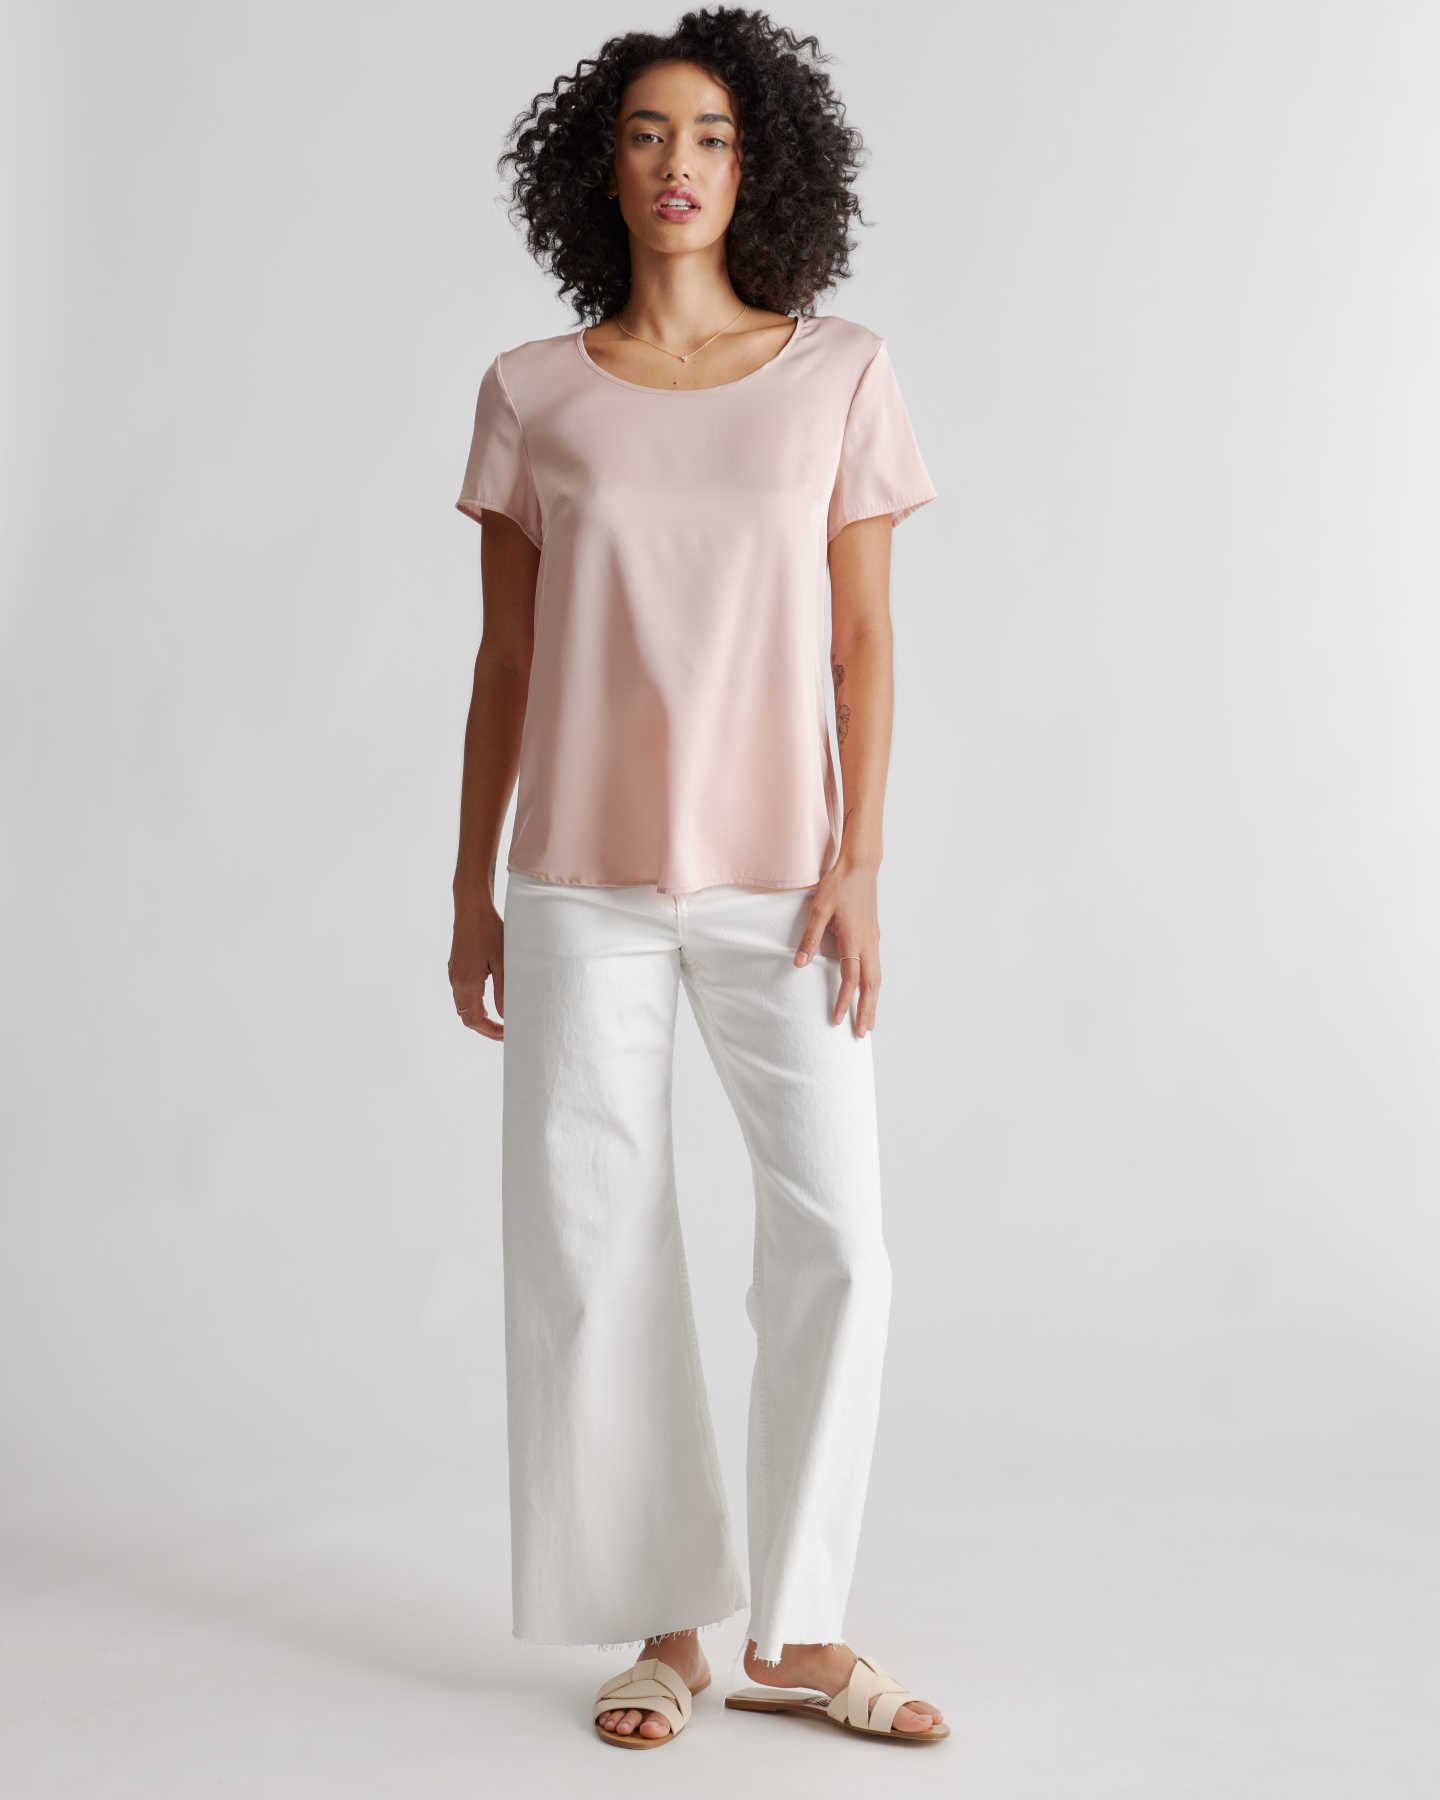 You May Also Like - Washable Stretch Silk Tee - Coastal Pink